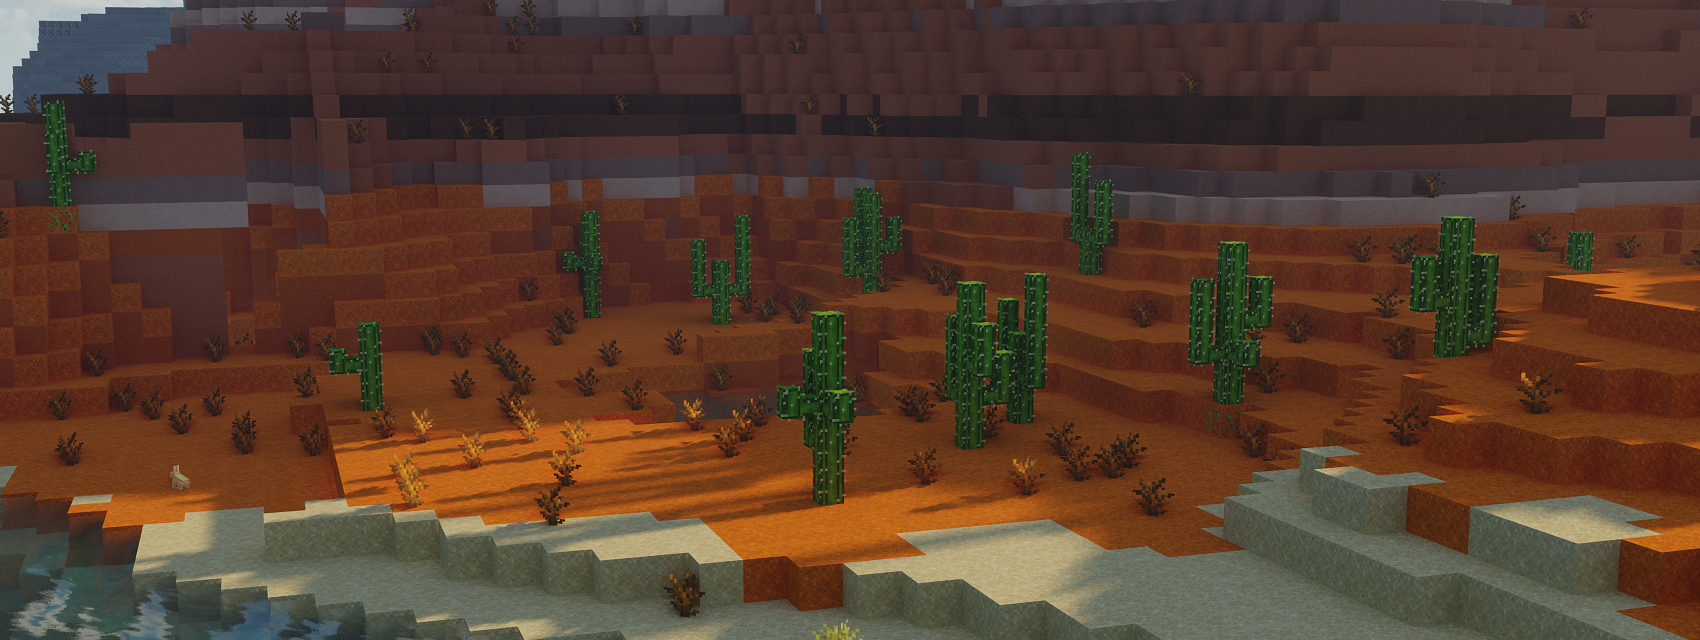 Earth Mobs Mod for minecraft 1.16.3, 1.16.4, 1.165 - Mods - Forge Forums